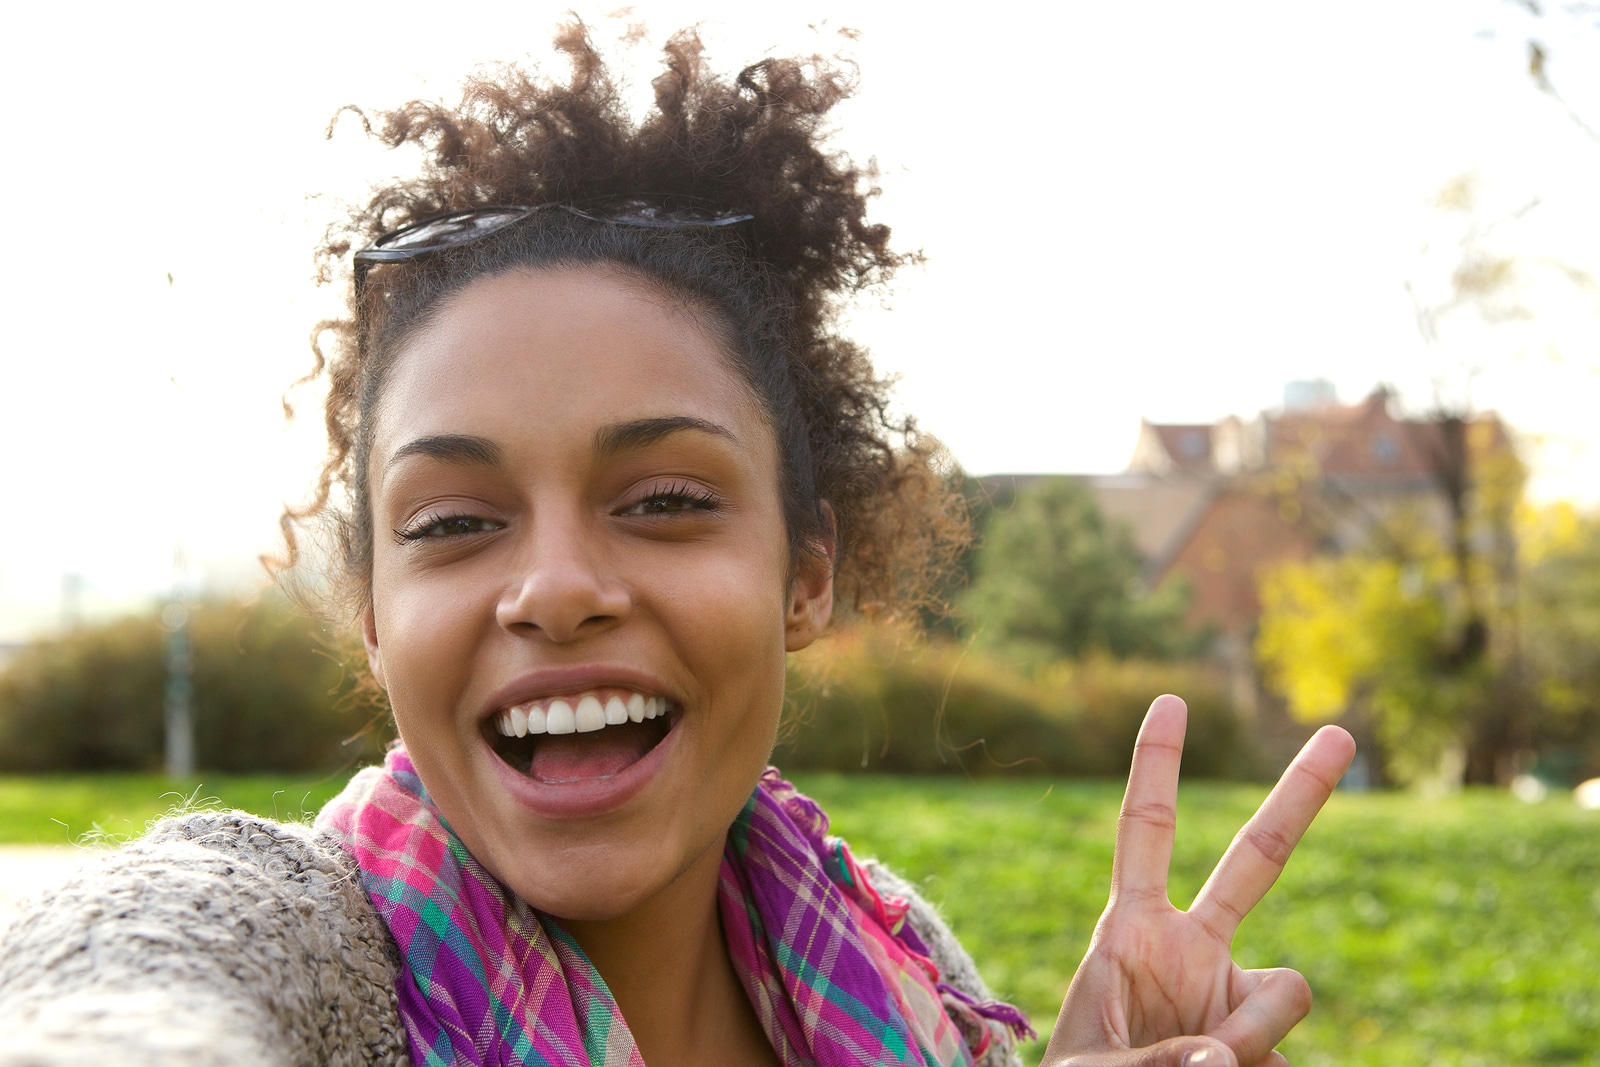 Selfie portrait of a happy young woman with peace sign